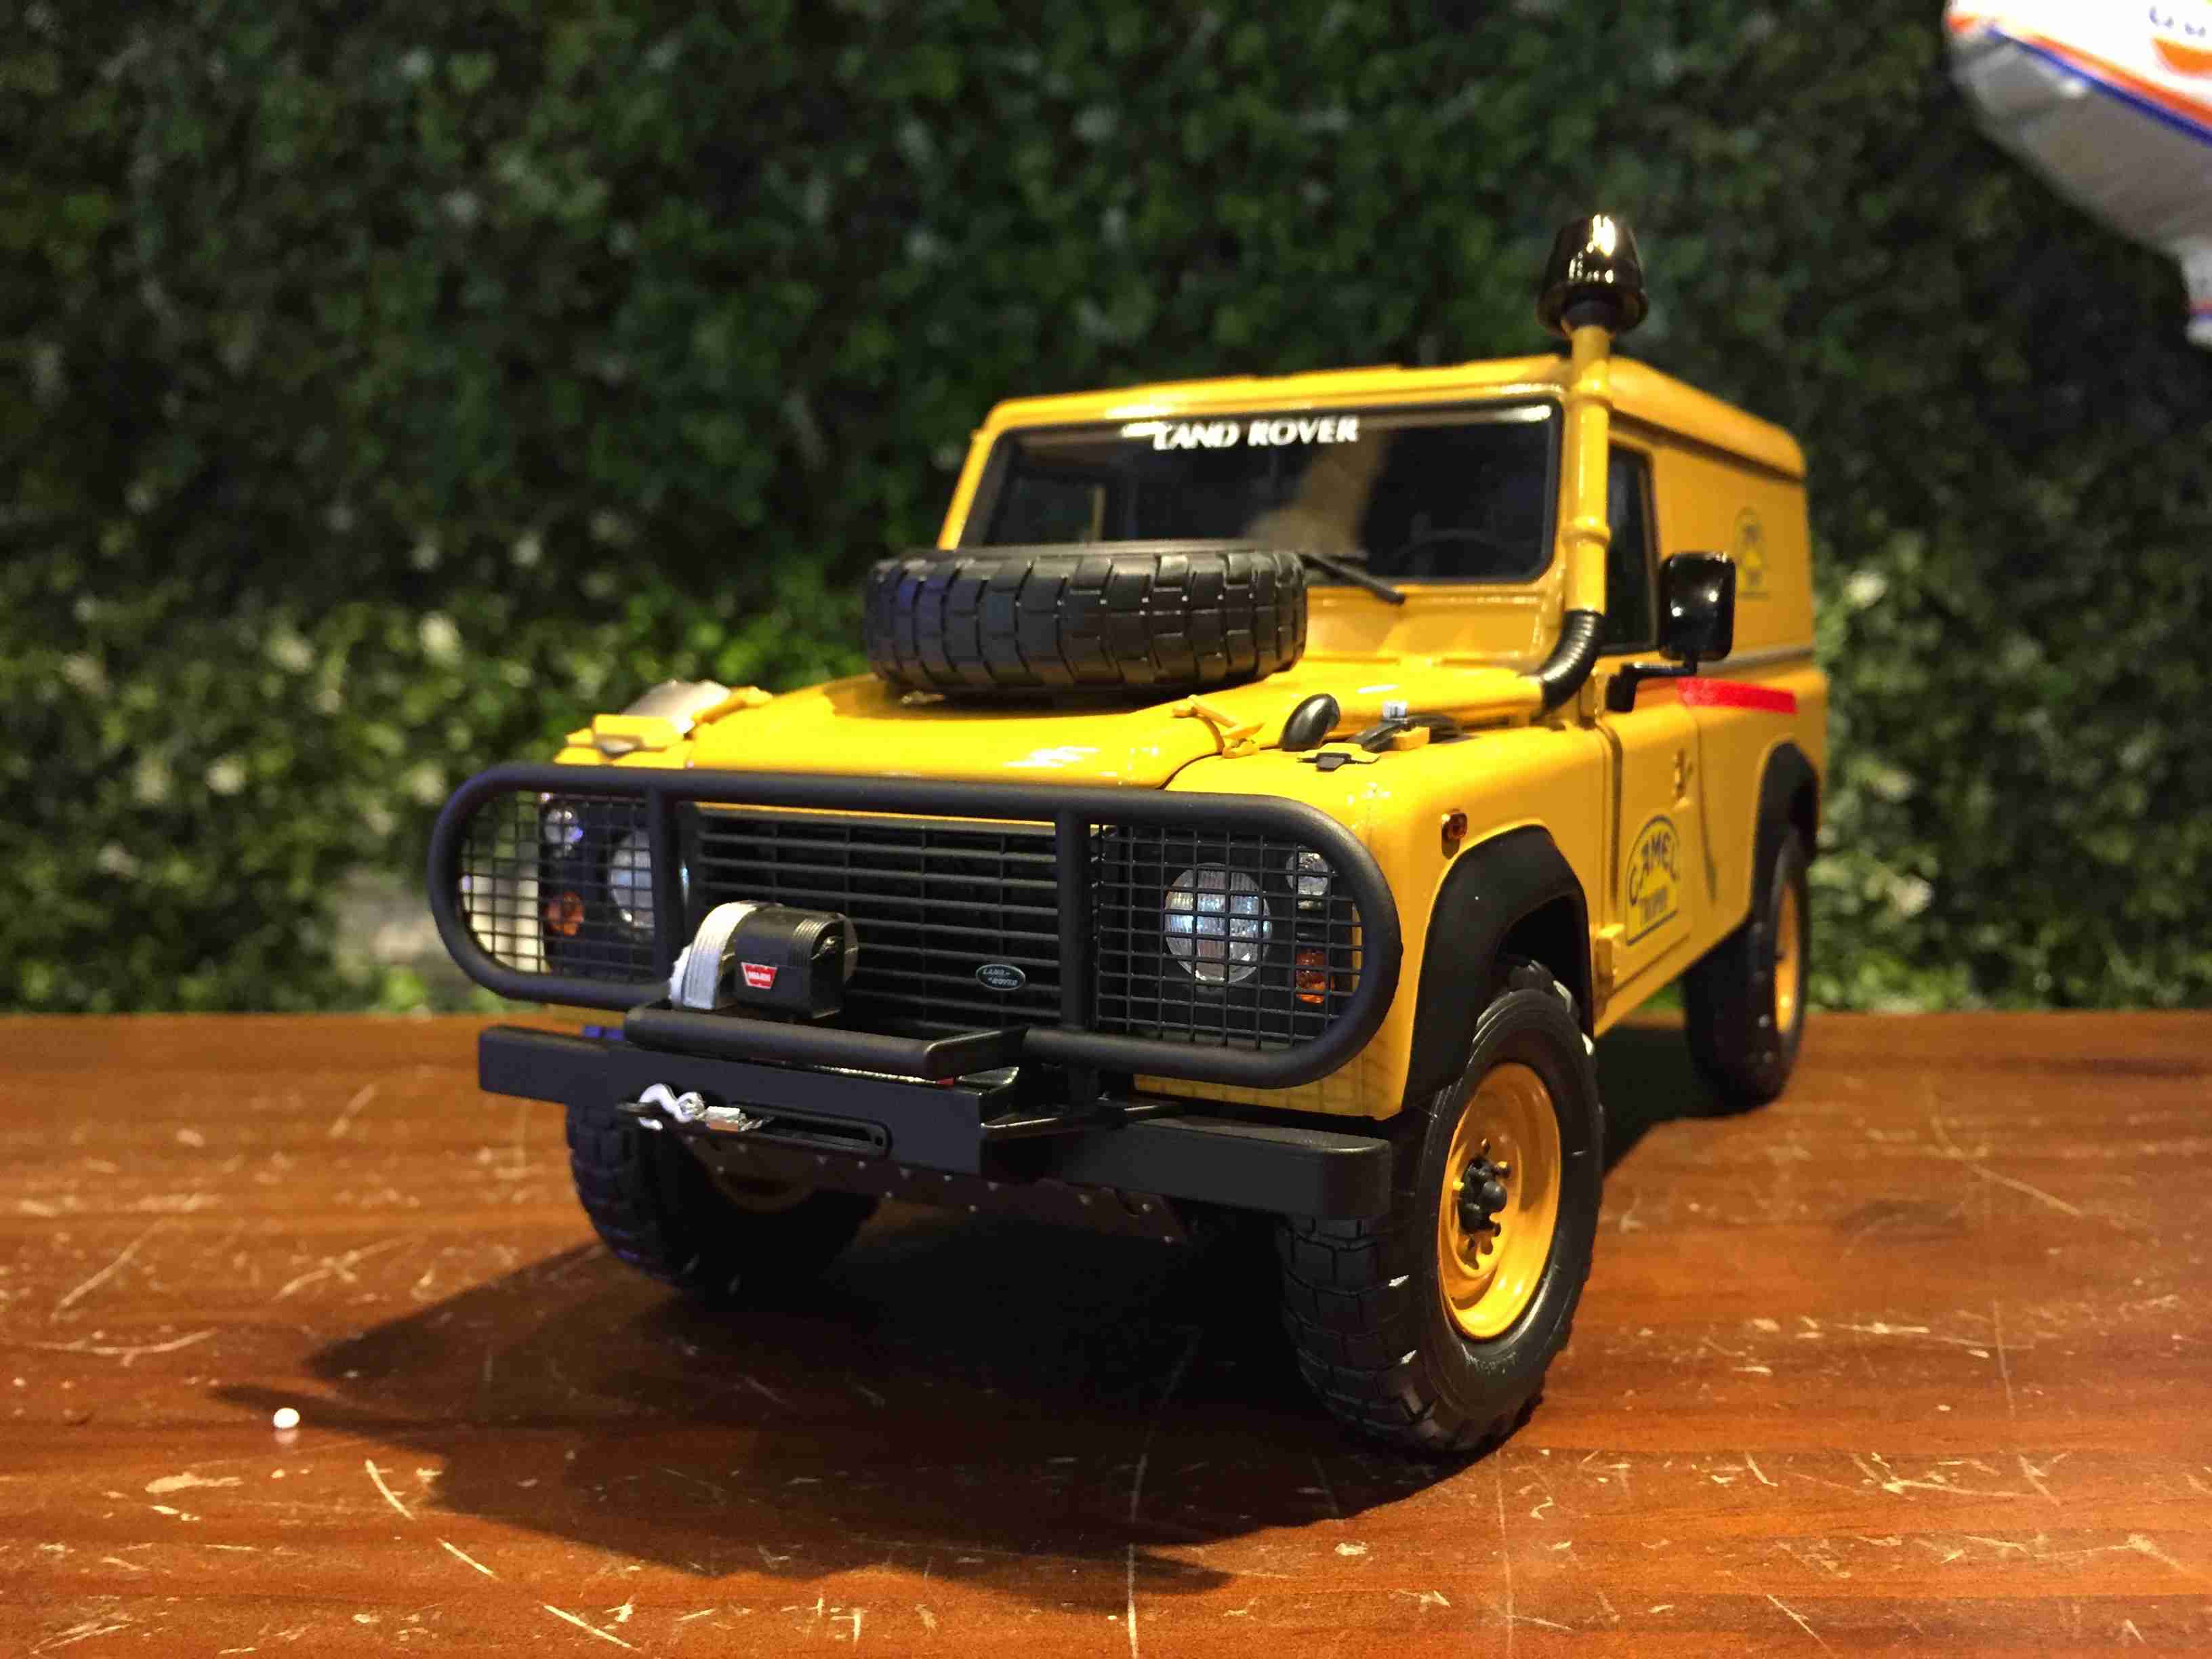 1/18 Almost Real Land Rover 110 Camel Trophy 810311【MGM】